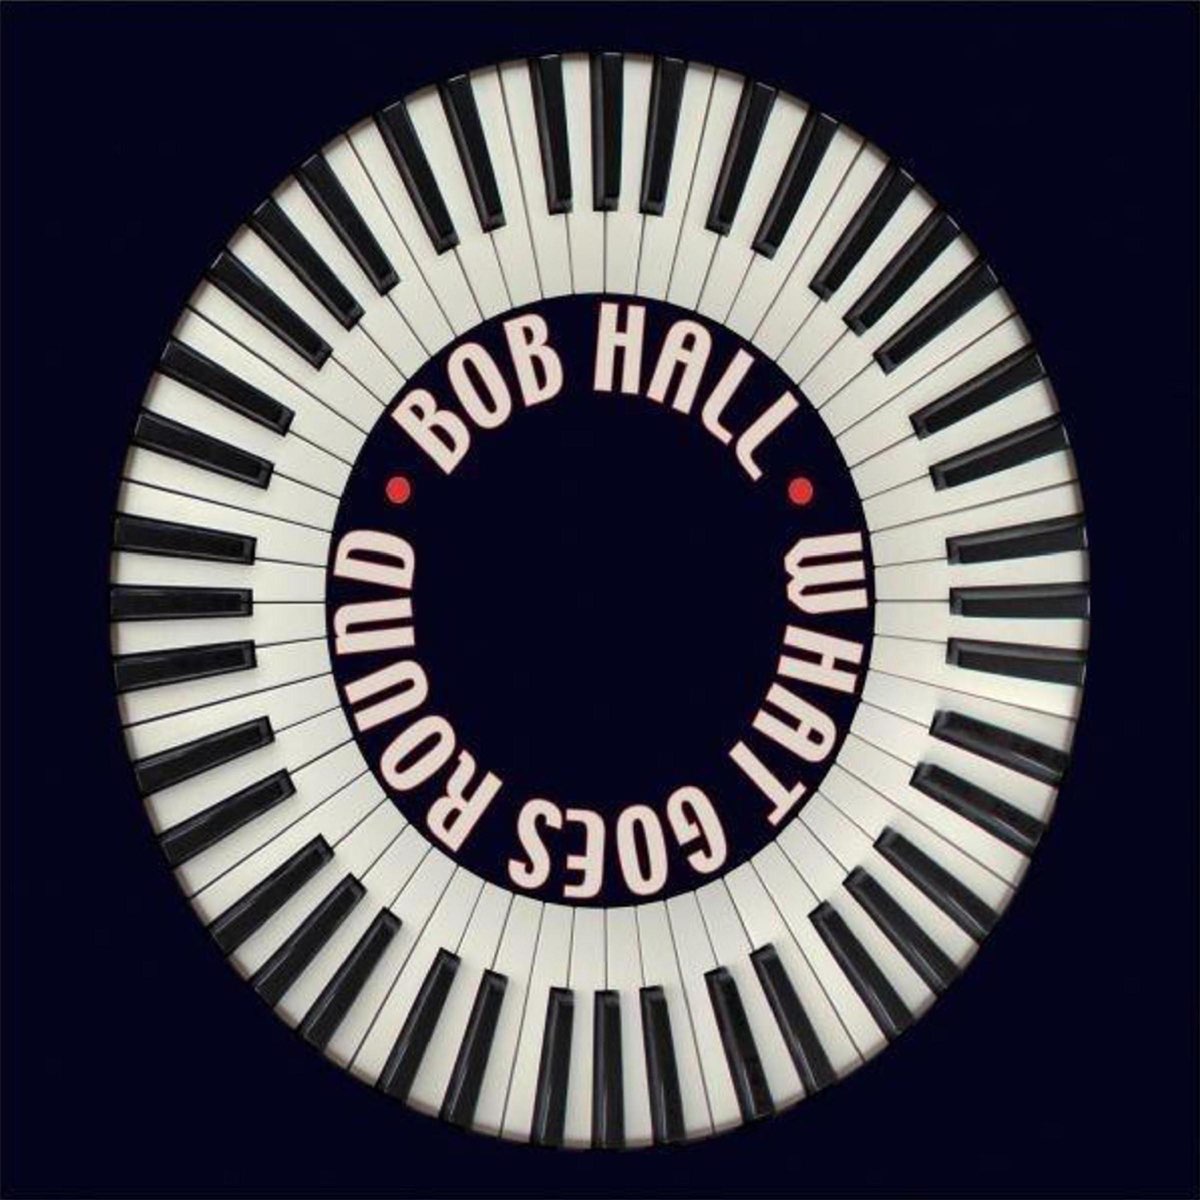 Bob Hall - Running with the Blues. Dag Finn - what goes around (comes around). Come Round. Tuff - 2012 - what goes around comes around again.